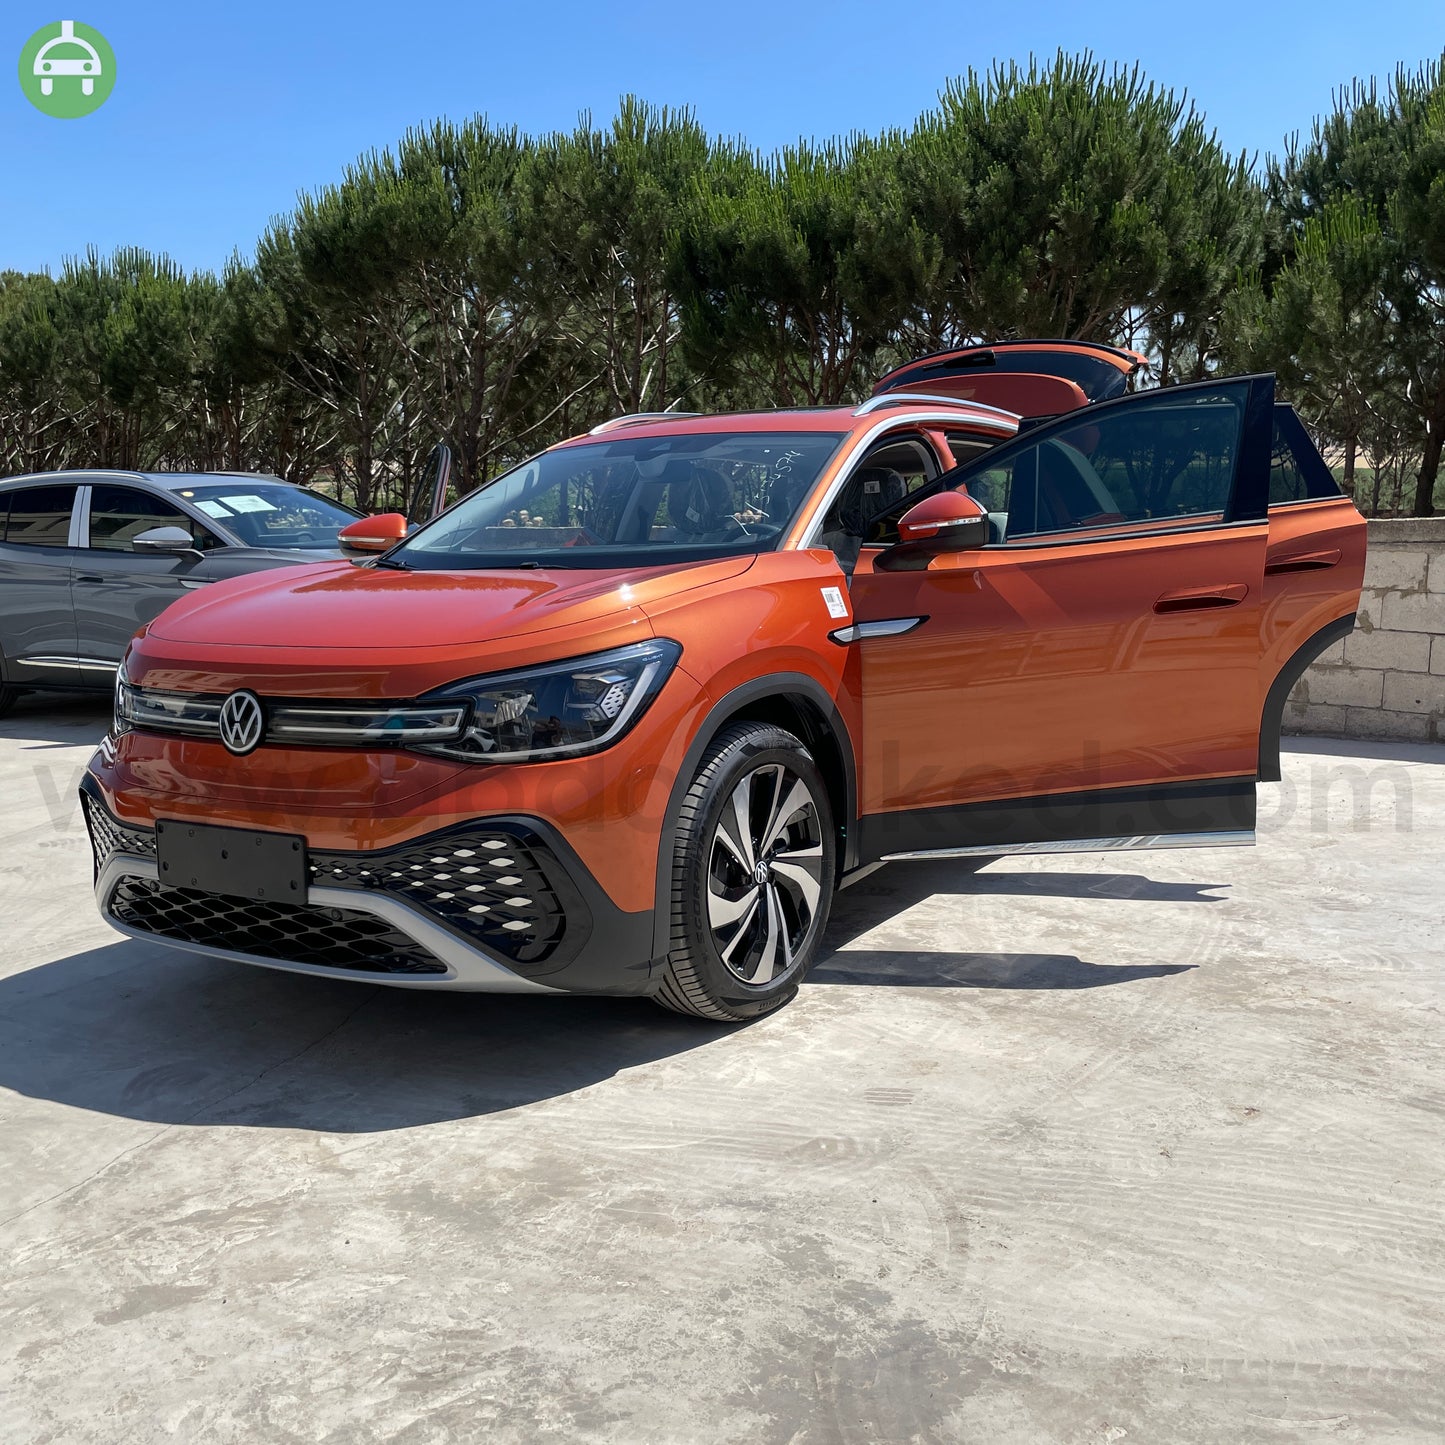 VW ID6 Crozz Pure+ 2022 7-Seater Lava Orange Color 550km Range/Charge Fully Electric Car (New - 0KM)